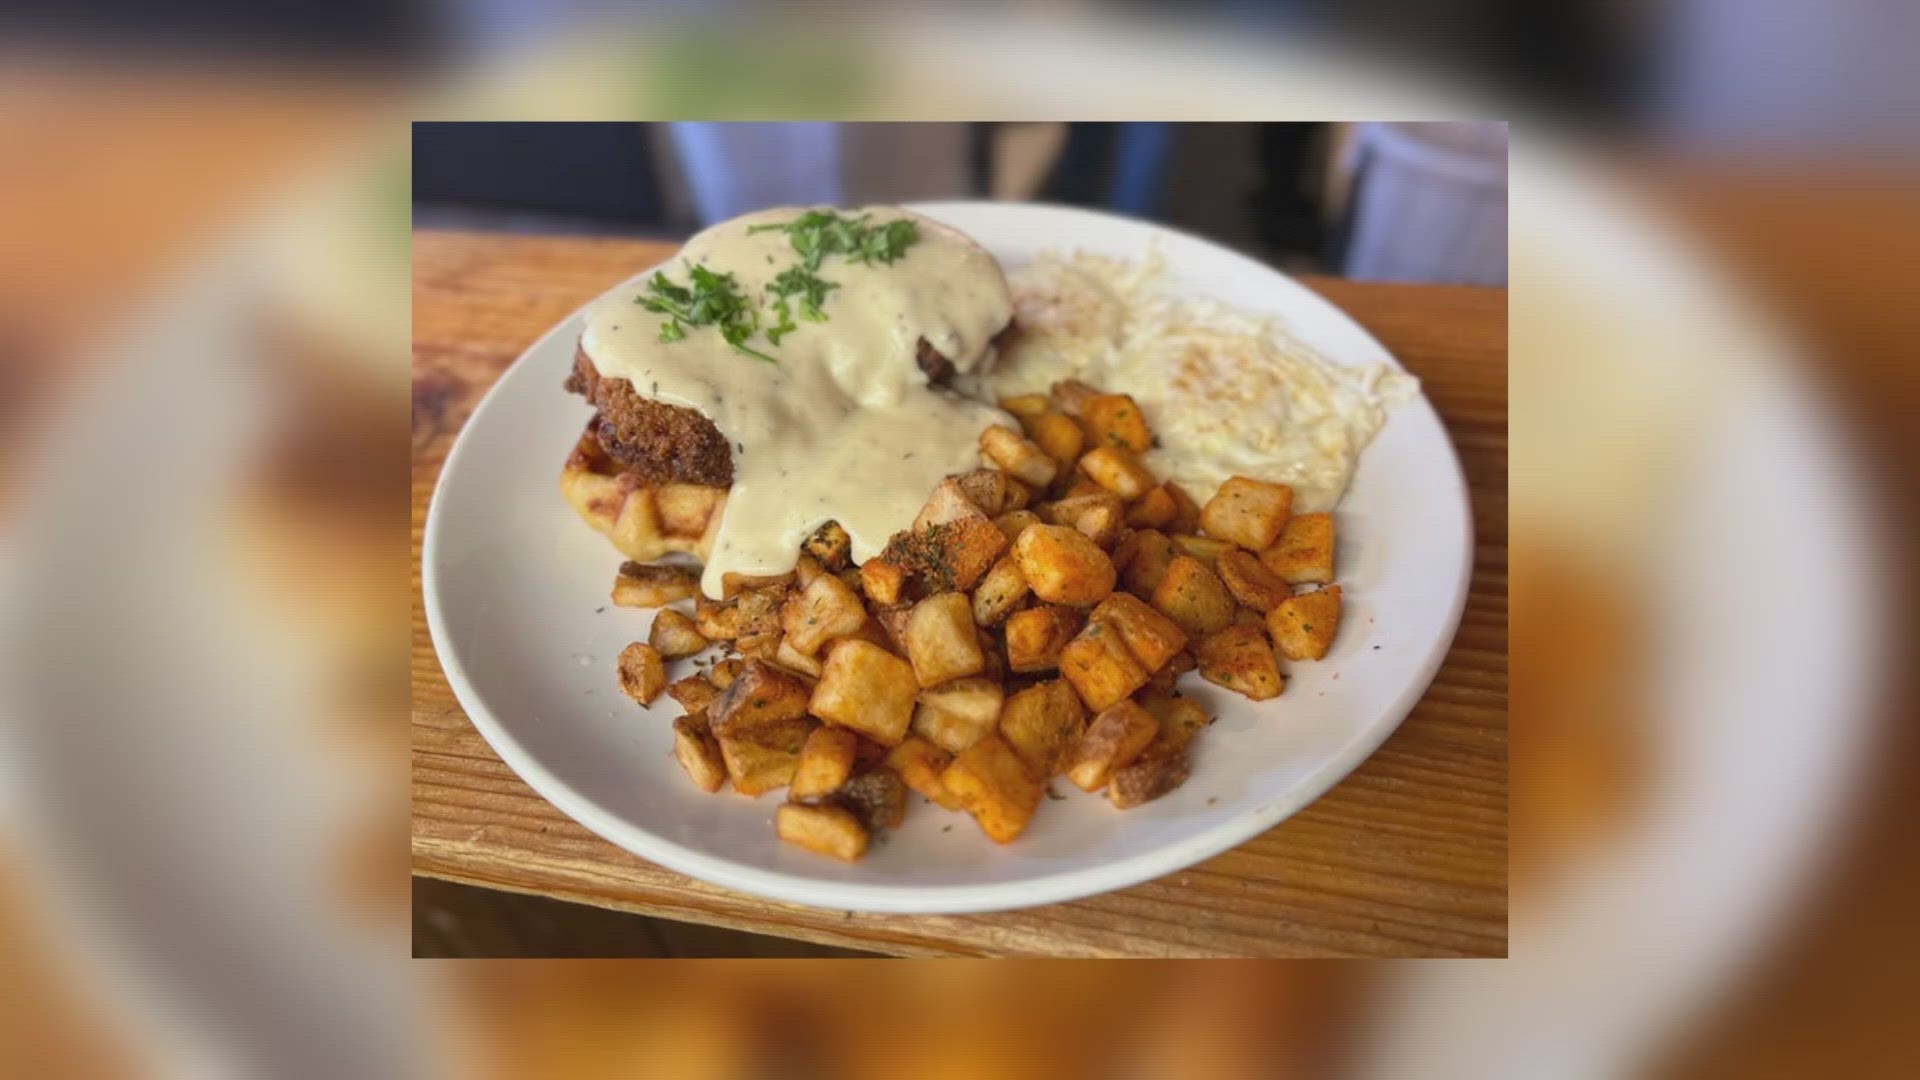 Hear from 6 News' Crystal Pratt on what makes Water Street Waffle Company the place to be.